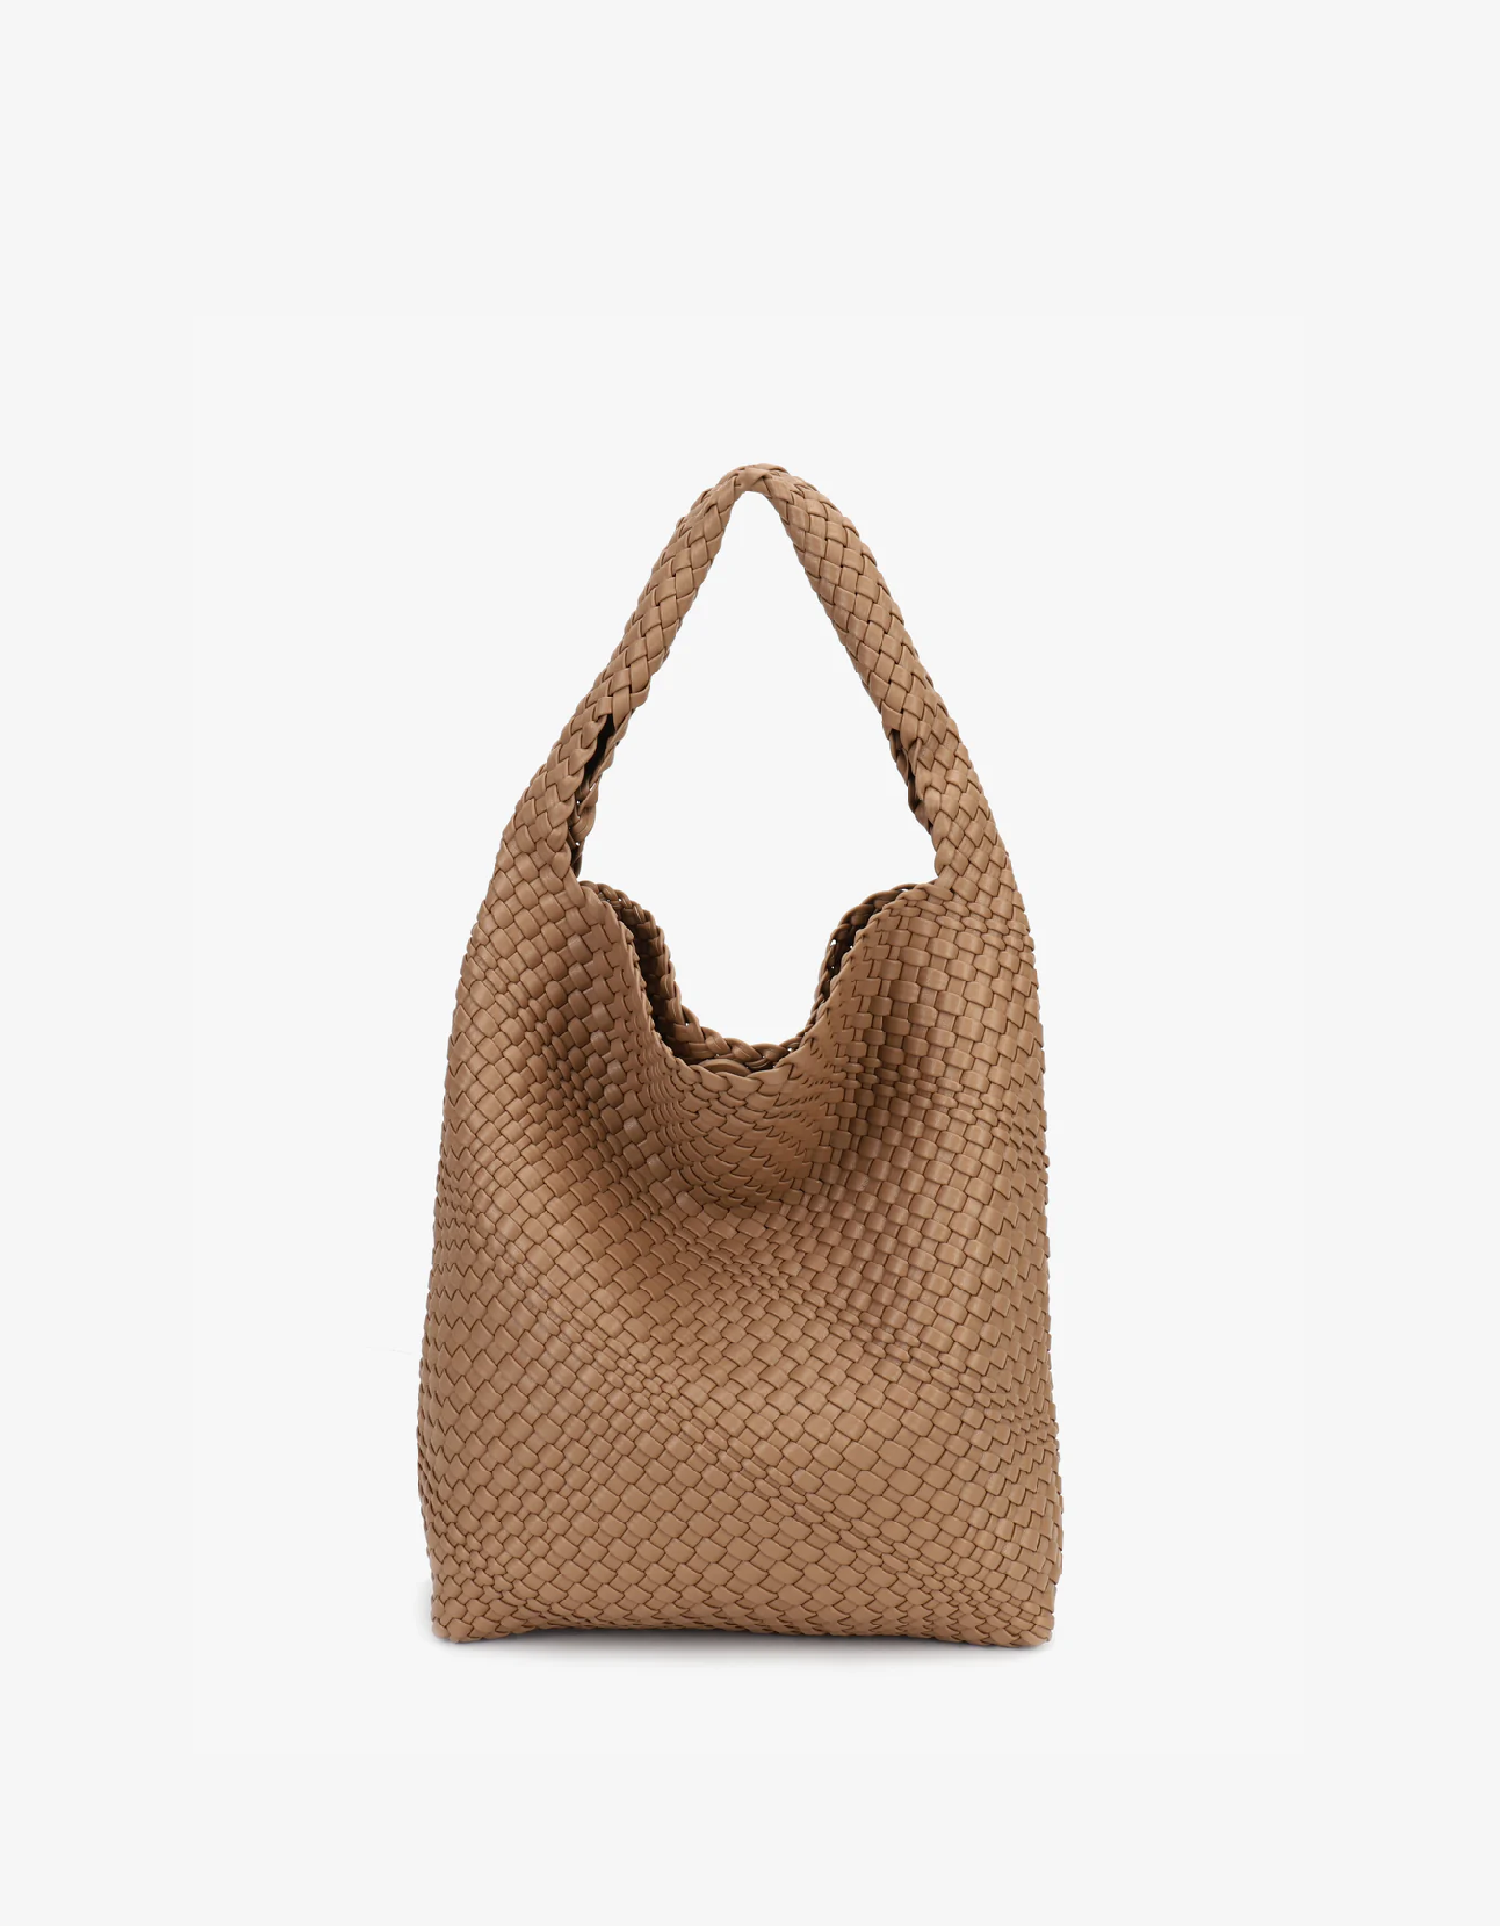 EVERLEIGH WOVEN SHOULDER TAUPE